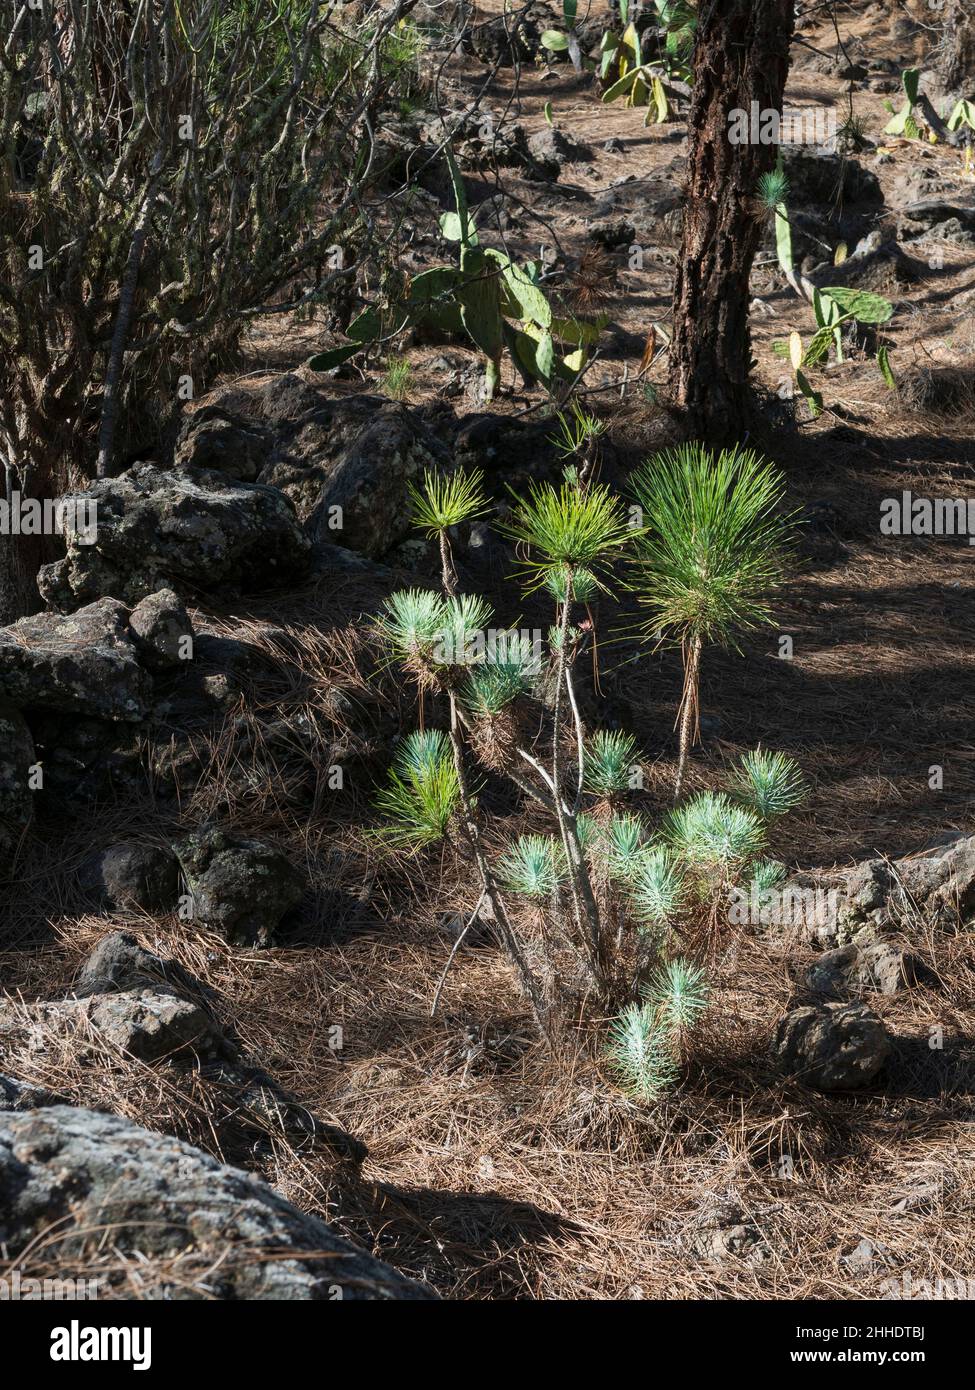 Canary pines in Tenerife, in the lowest level of the Corona Forestal at Las Estrellas, Guia de Isora. Seedlings. Stock Photo